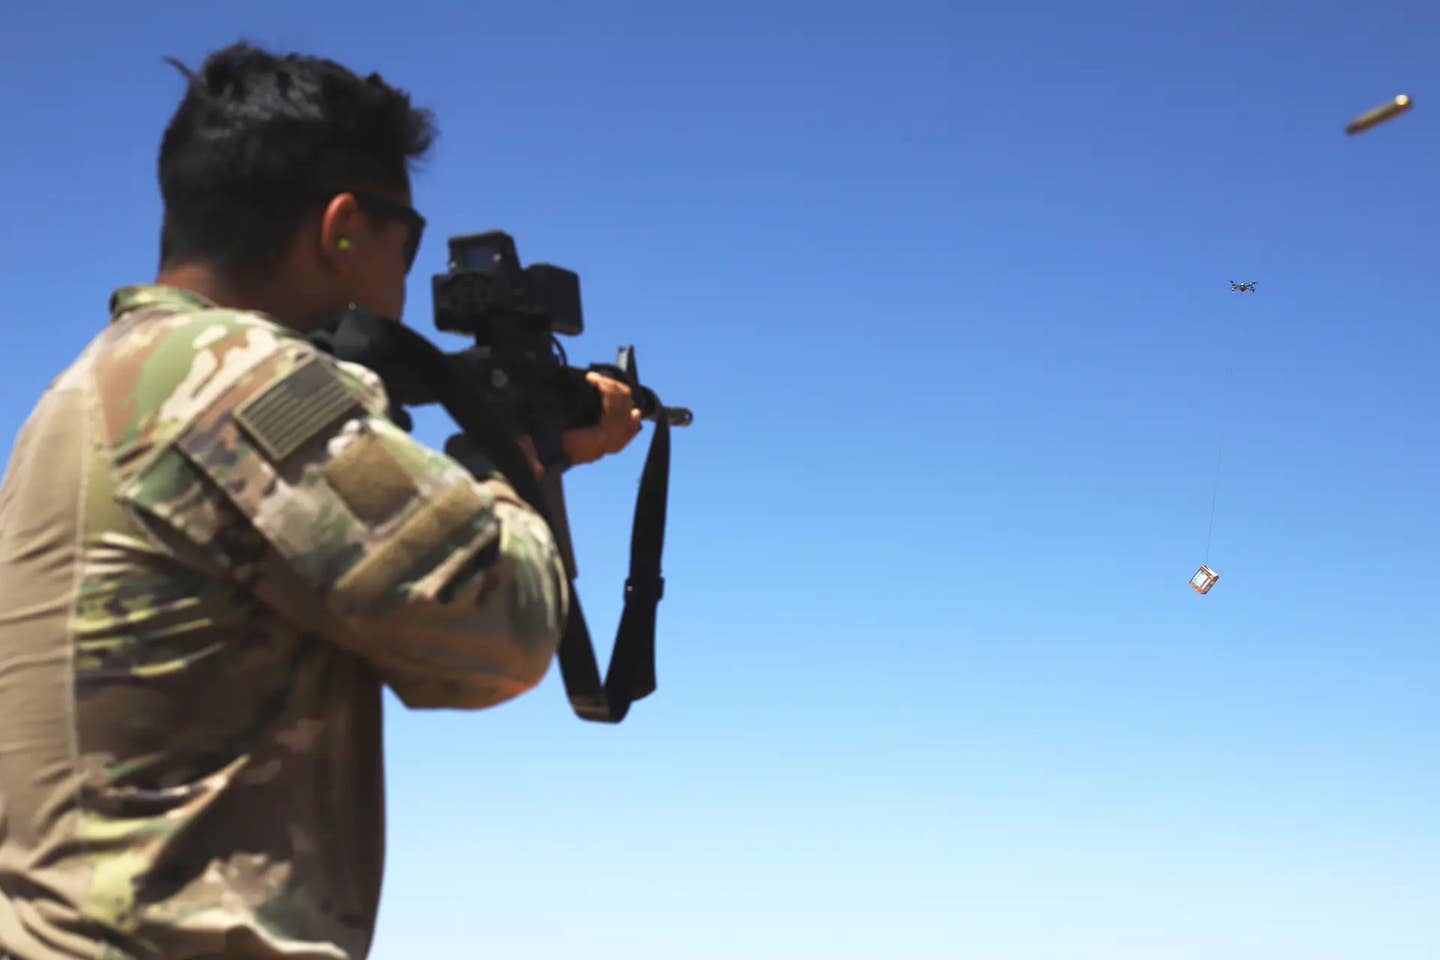 A member of the U.S. Army fires an M4 carbine with a SMASH 2000 sight at a box suspended underneath a small drone during training in Syria in 2020. <em>U.S. Army</em>